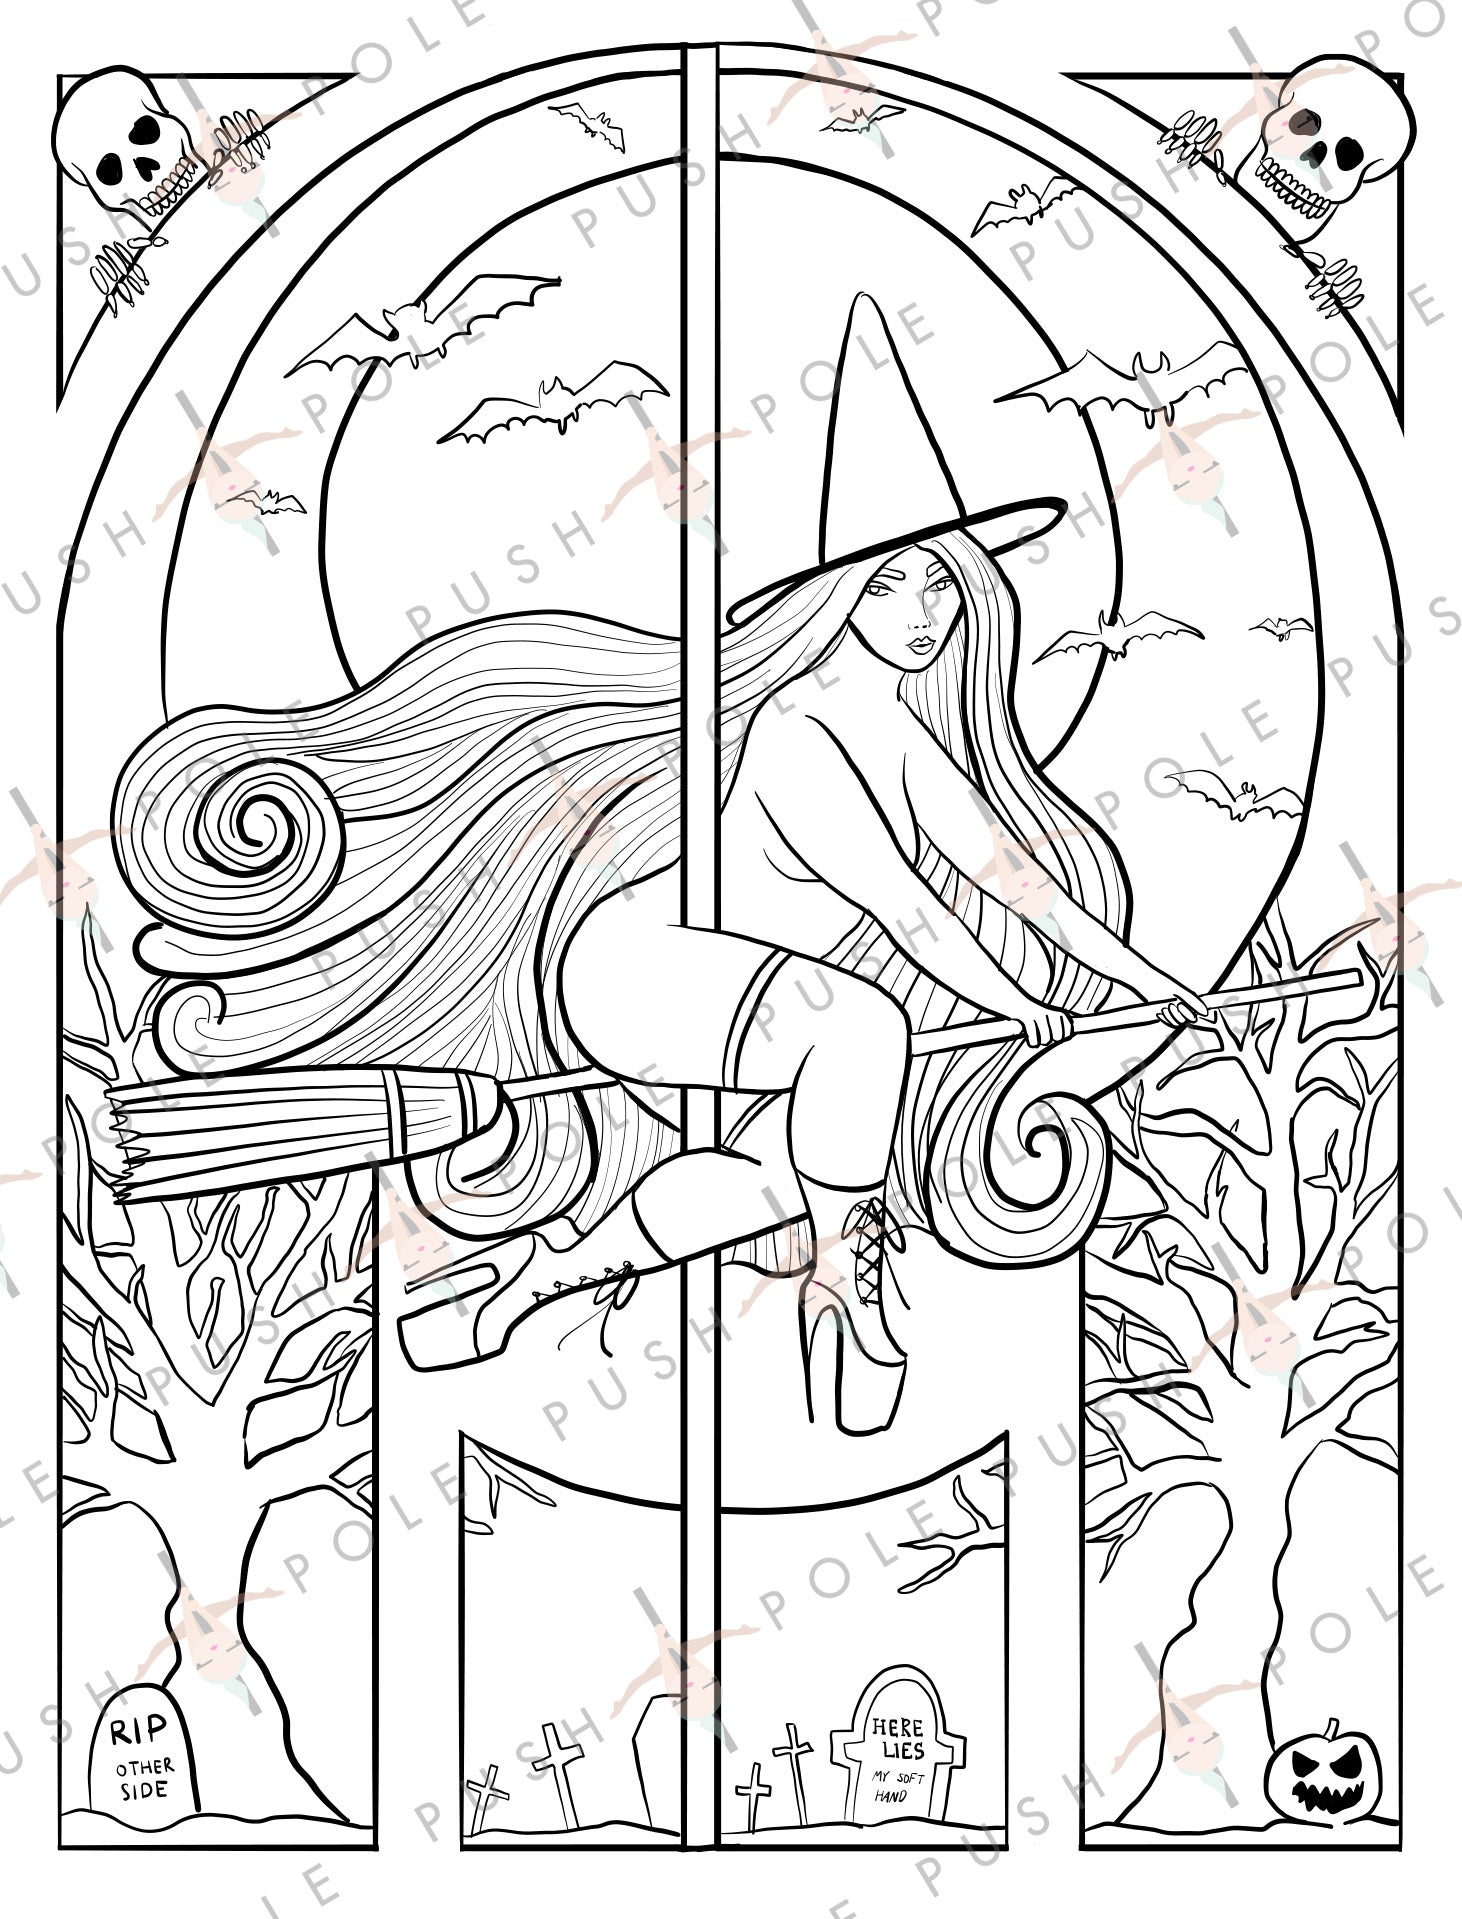 Witch halloween pole dancer digital coloring page x â push and pole